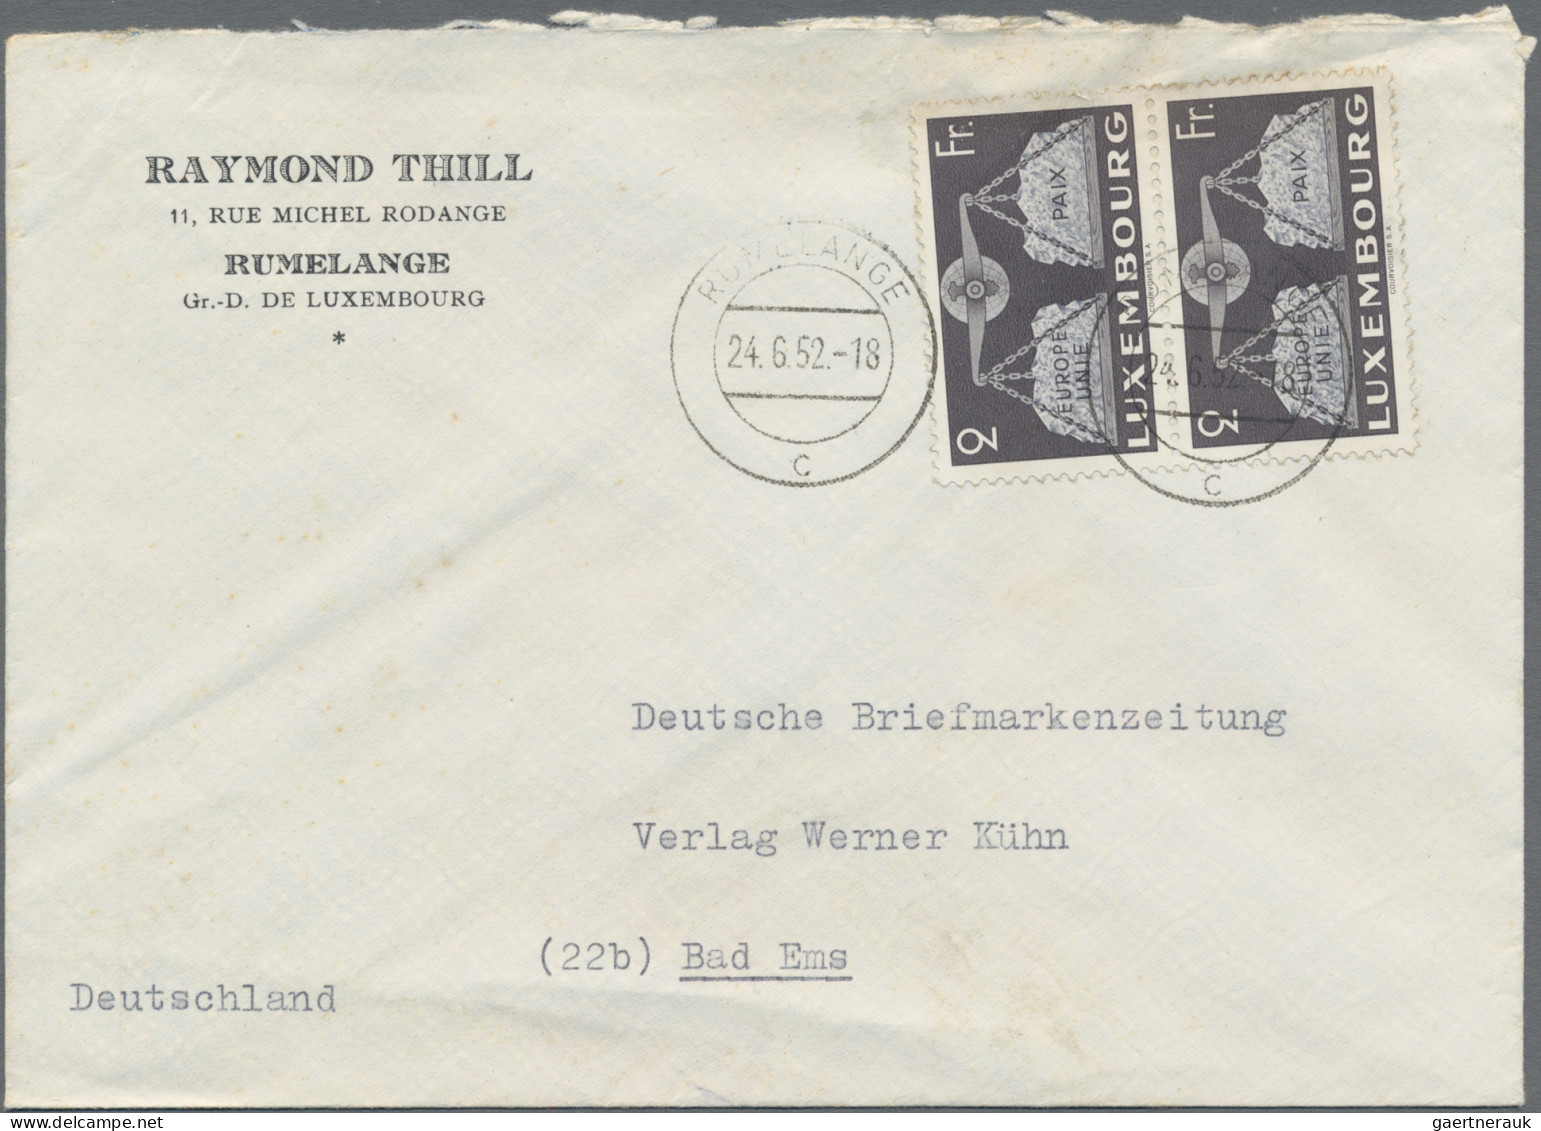 Luxembourg: 1946/1963, lot of 20 covers/cards, mainly commercial mail to Germany